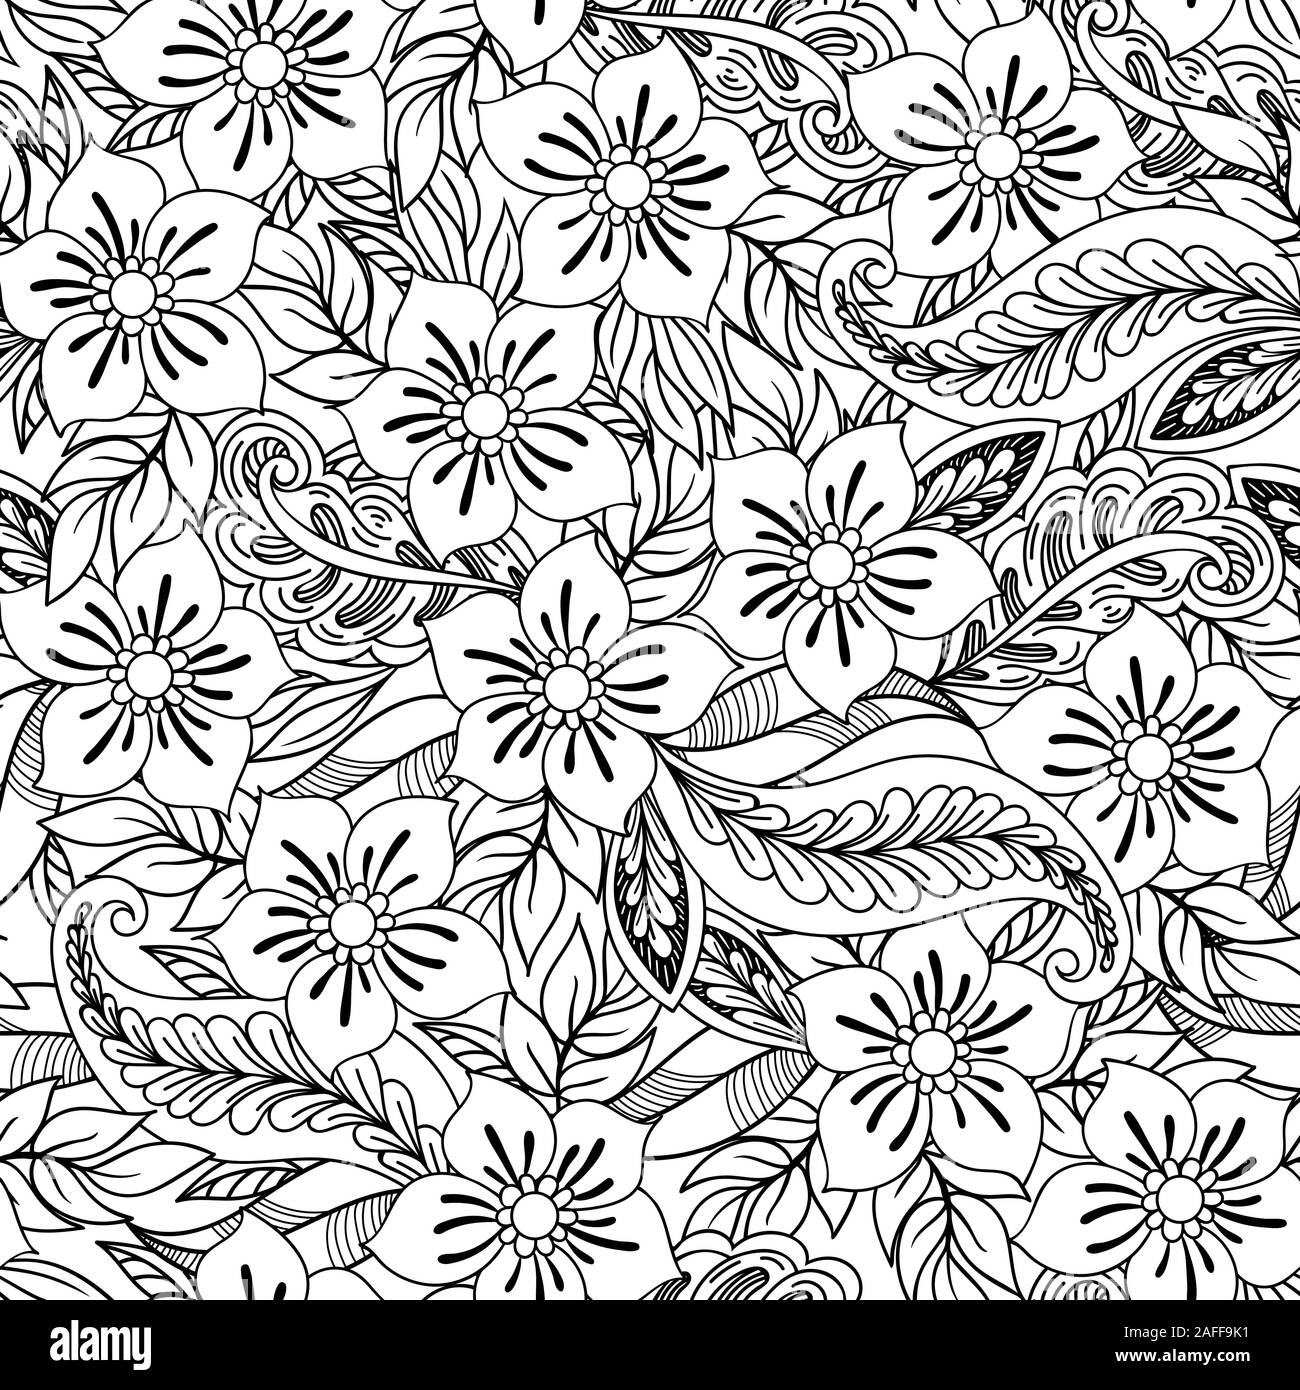 Hand drawn seamless pattern with leaves and flowers. Doodles floral ornament. Black and white decorative elements. Perfect for wallpaper, adult coloring books, web page background, surface textures. Stock Vector